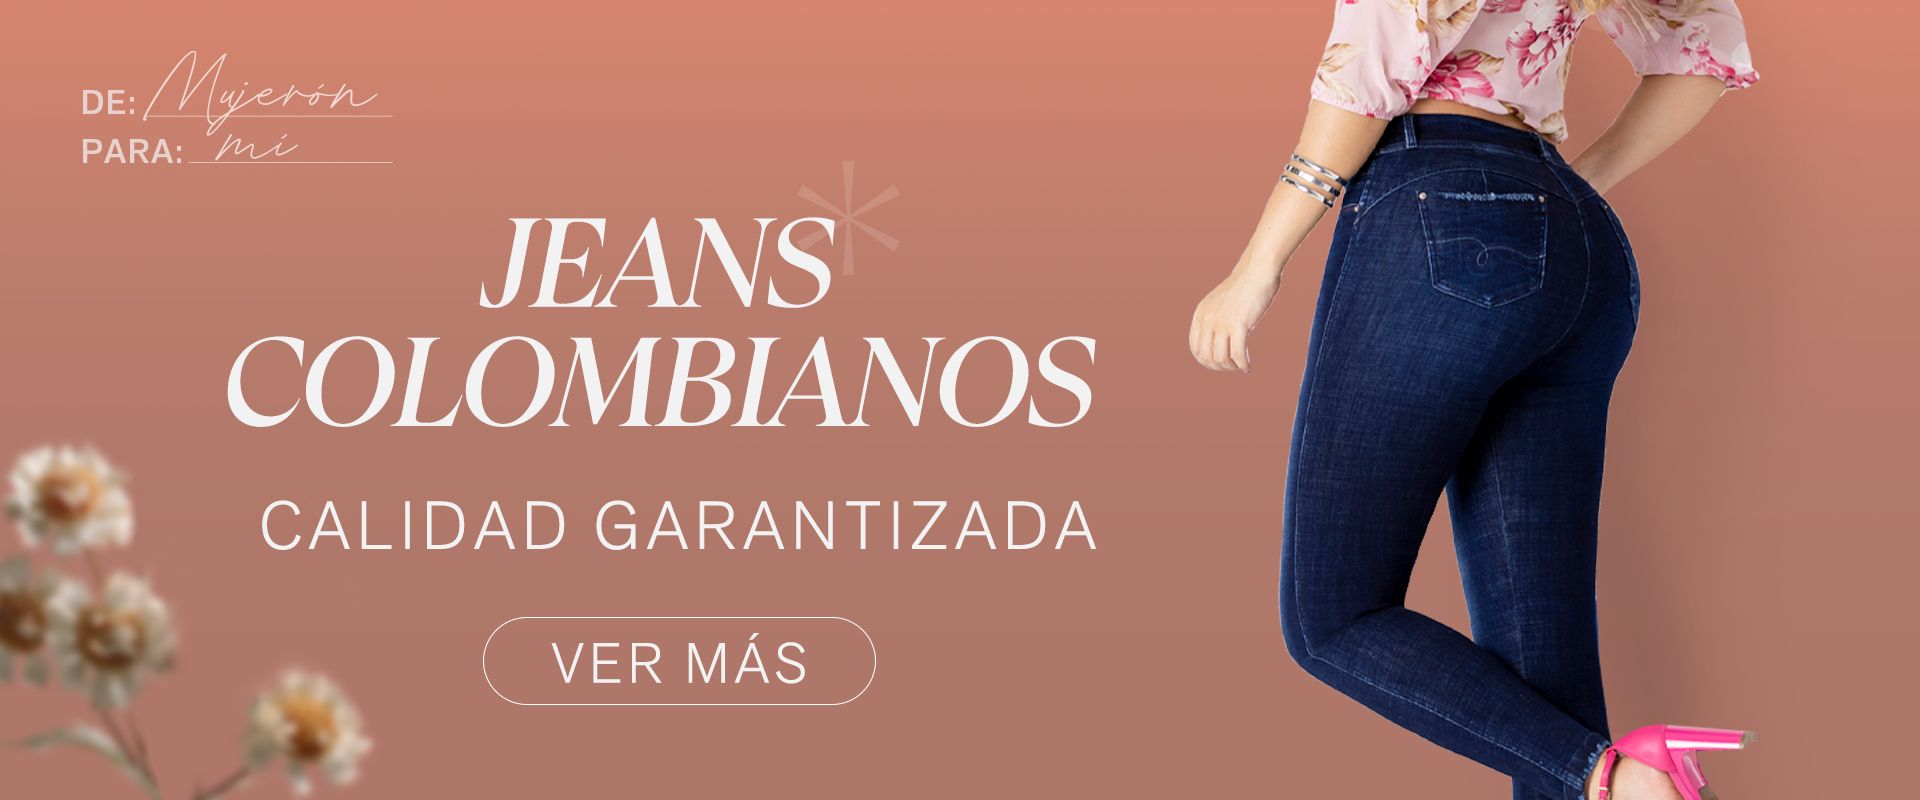 JEANS-COLOMBIANOS_1920x800